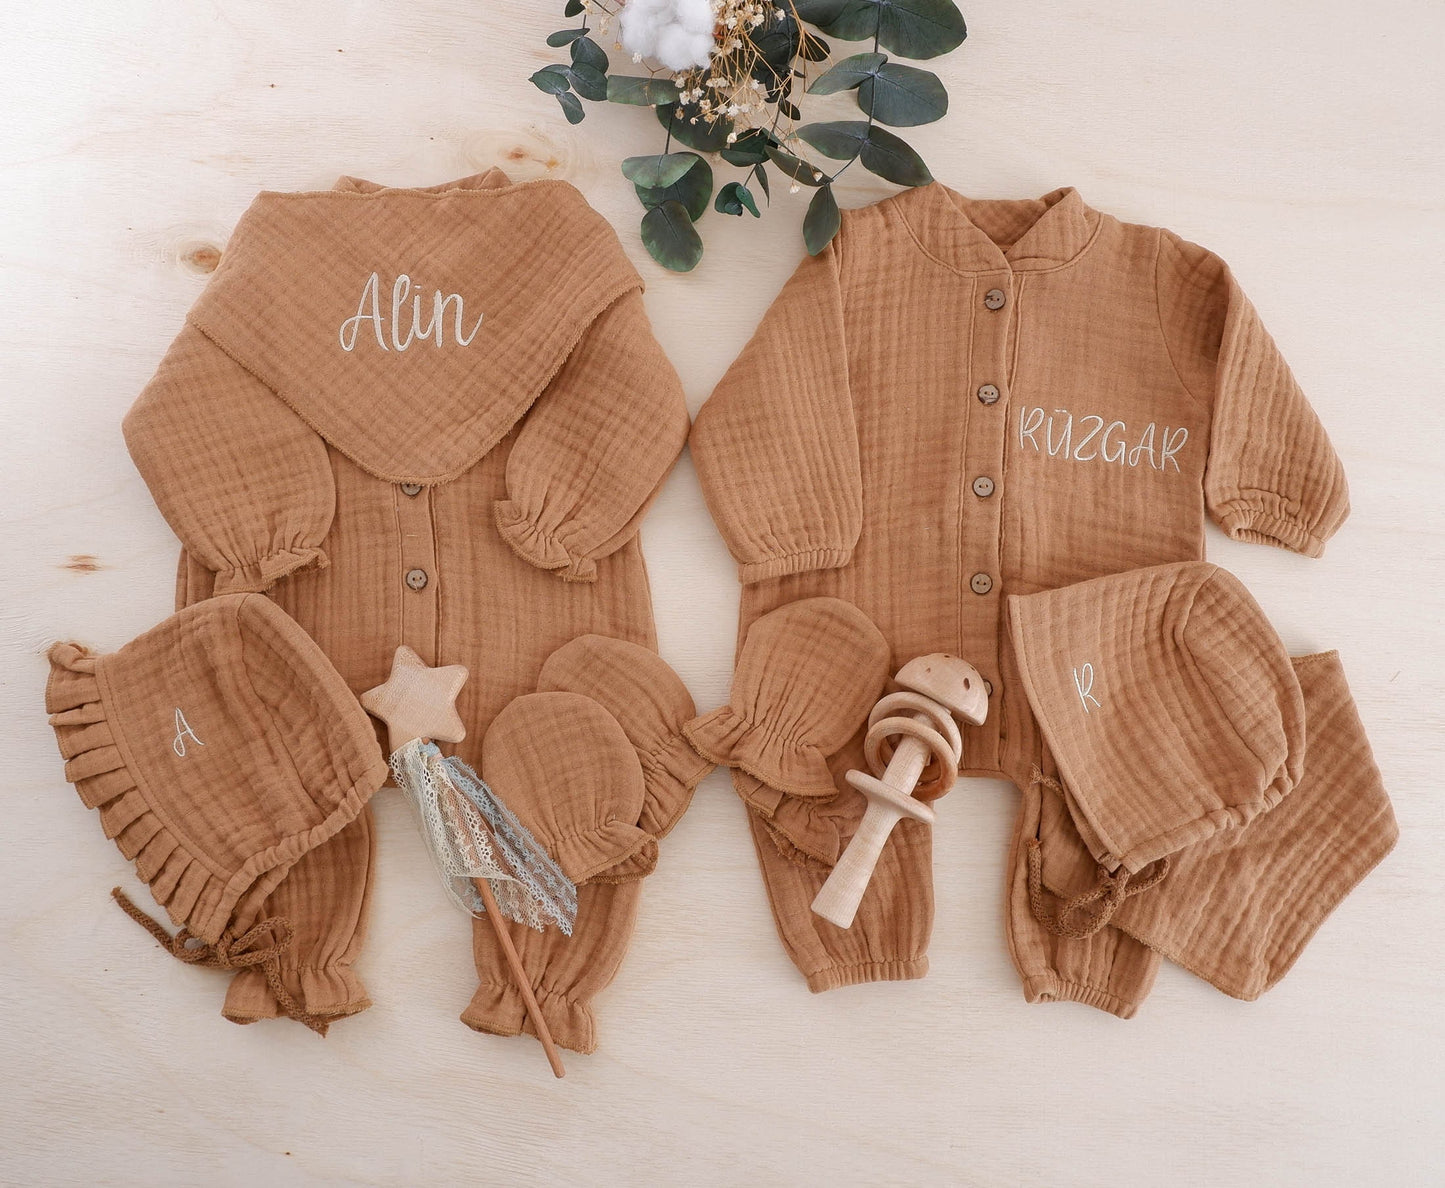 Personalized Coming Home Outfit, Baby Boy Outfit for Hospital, Newborn Hospital Outfit, Newborn Boy Coming Home Outfit, Personalized Romper